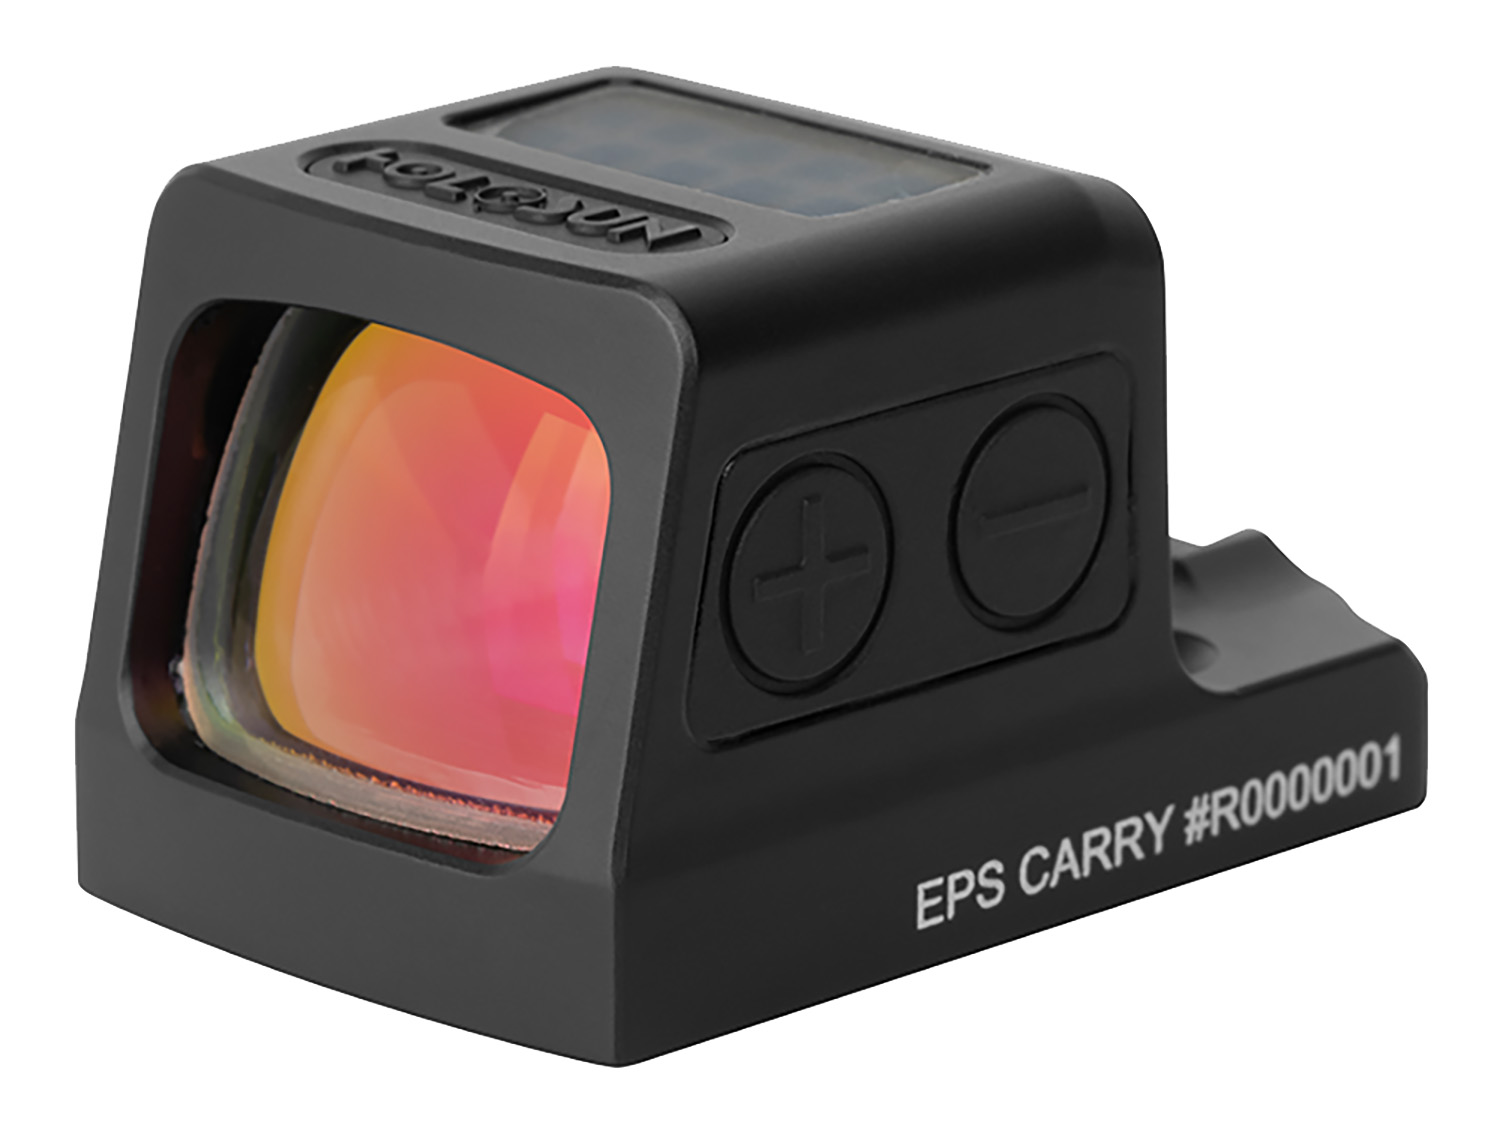 HOLOSUN EPS-CARRY-RD-2   ENCLSED PSTL SGT CRRY RED